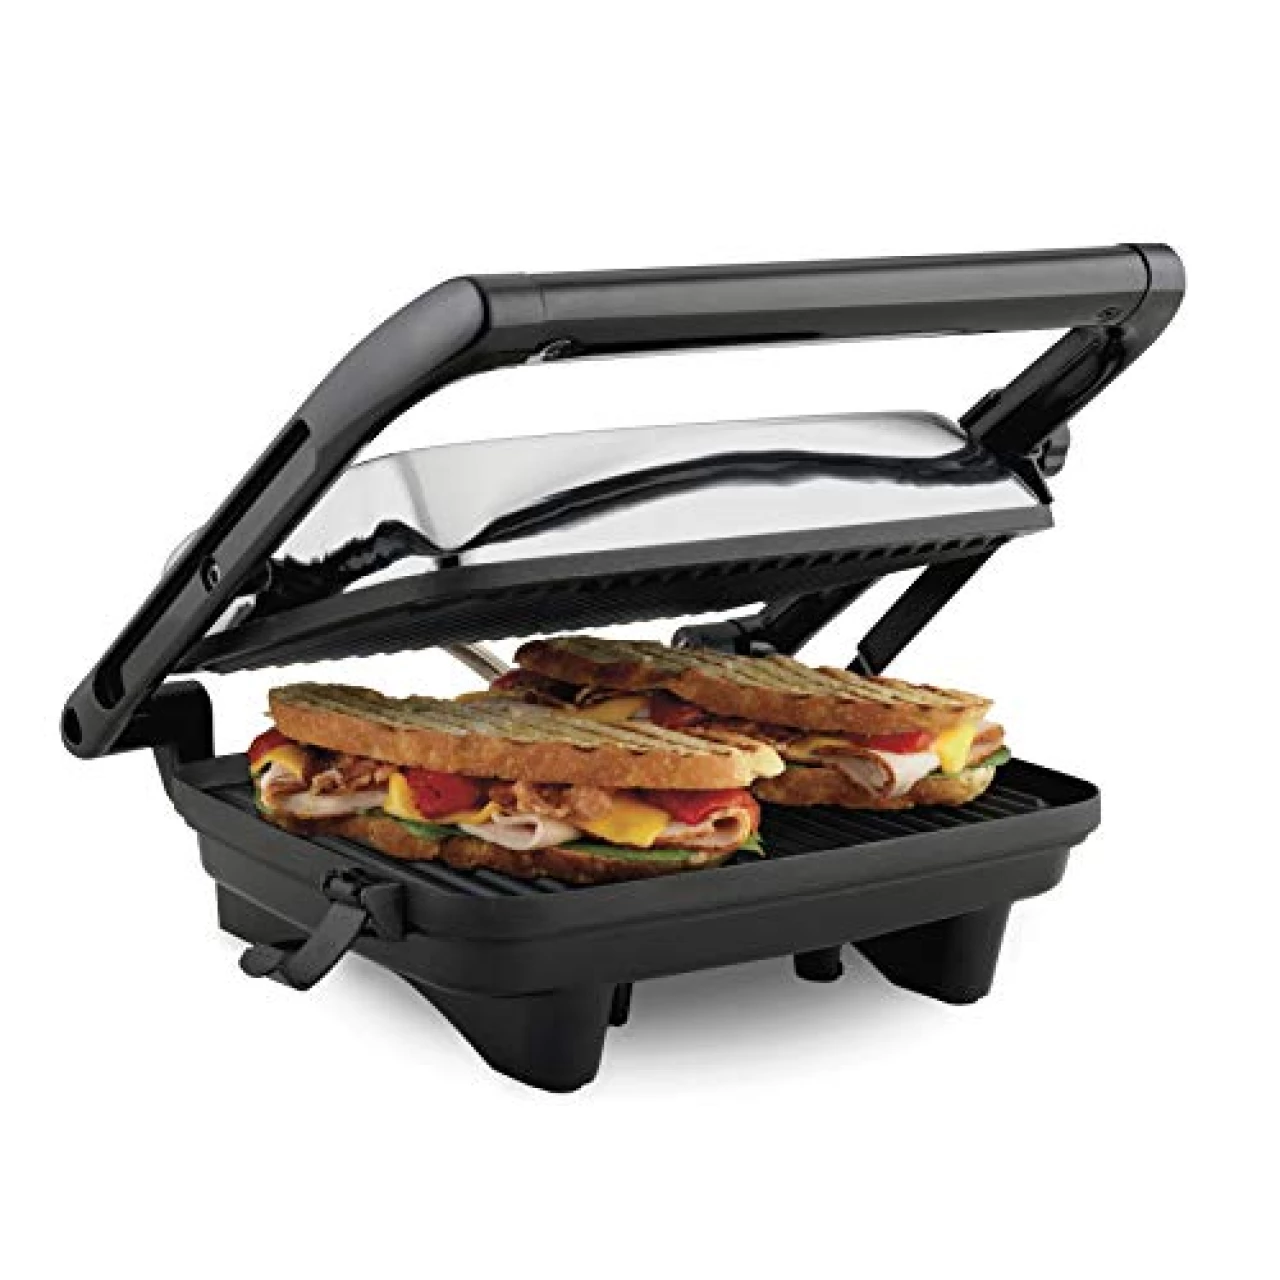 Hamilton Beach Panini Press Sandwich Maker &amp; Electric Indoor Grill with Locking Lid, Opens 180 Degrees for any Thickness for Quesadillas, Burgers &amp; More, Nonstick 8&quot; x 10&quot; Grids, Chrome (25460A)